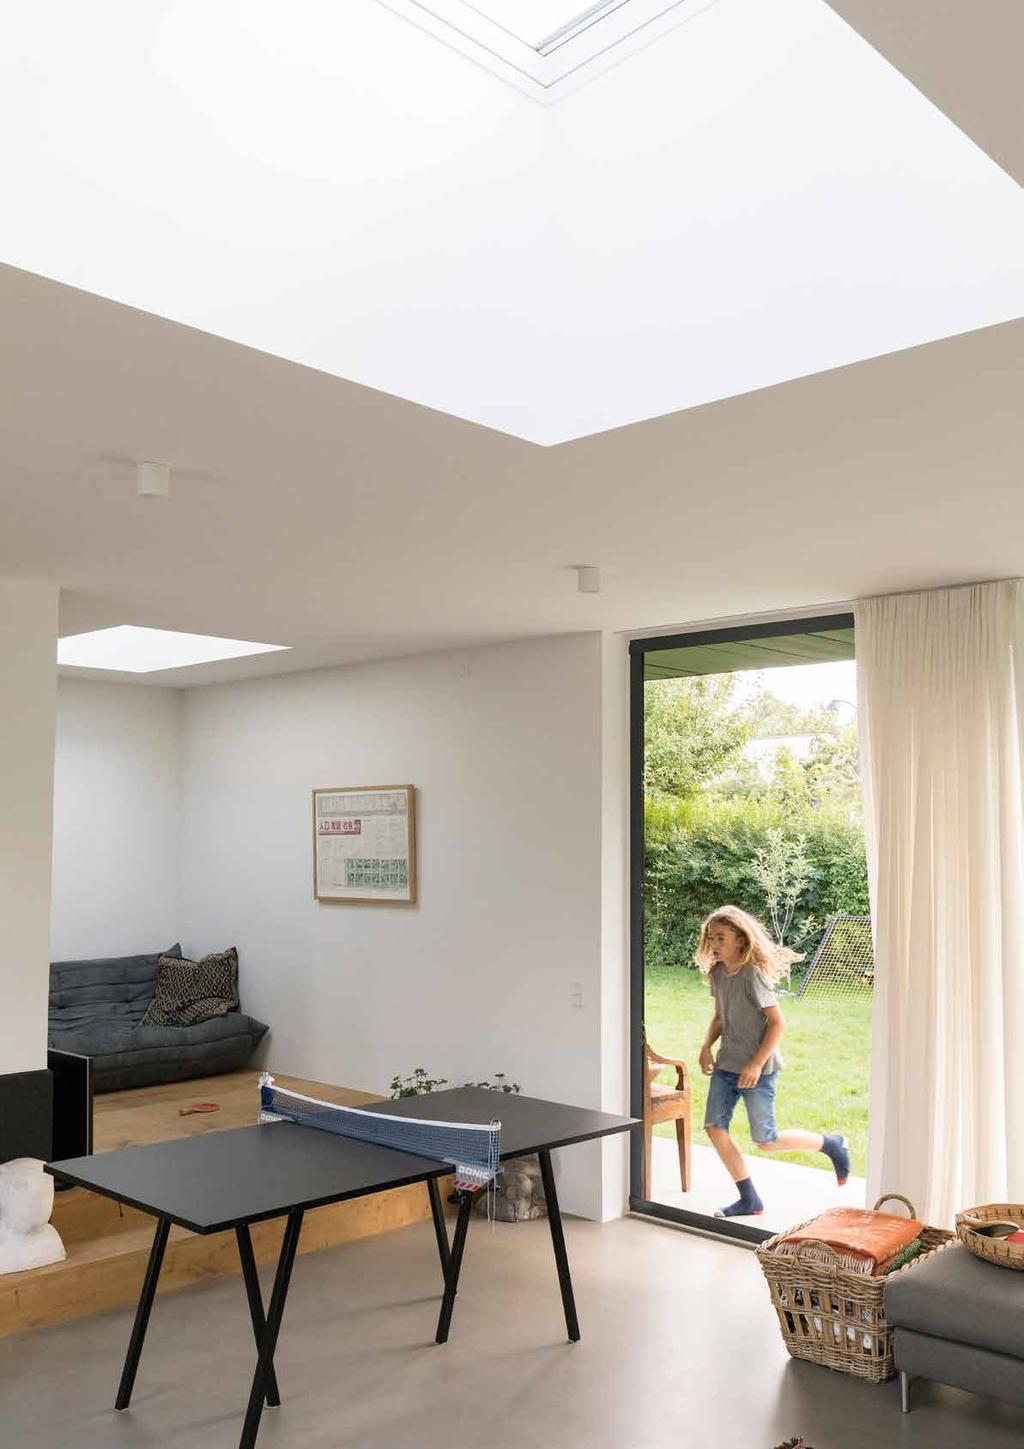 Indoor climate Air quality, temperature and daylight are essential components of a good indoor climate.